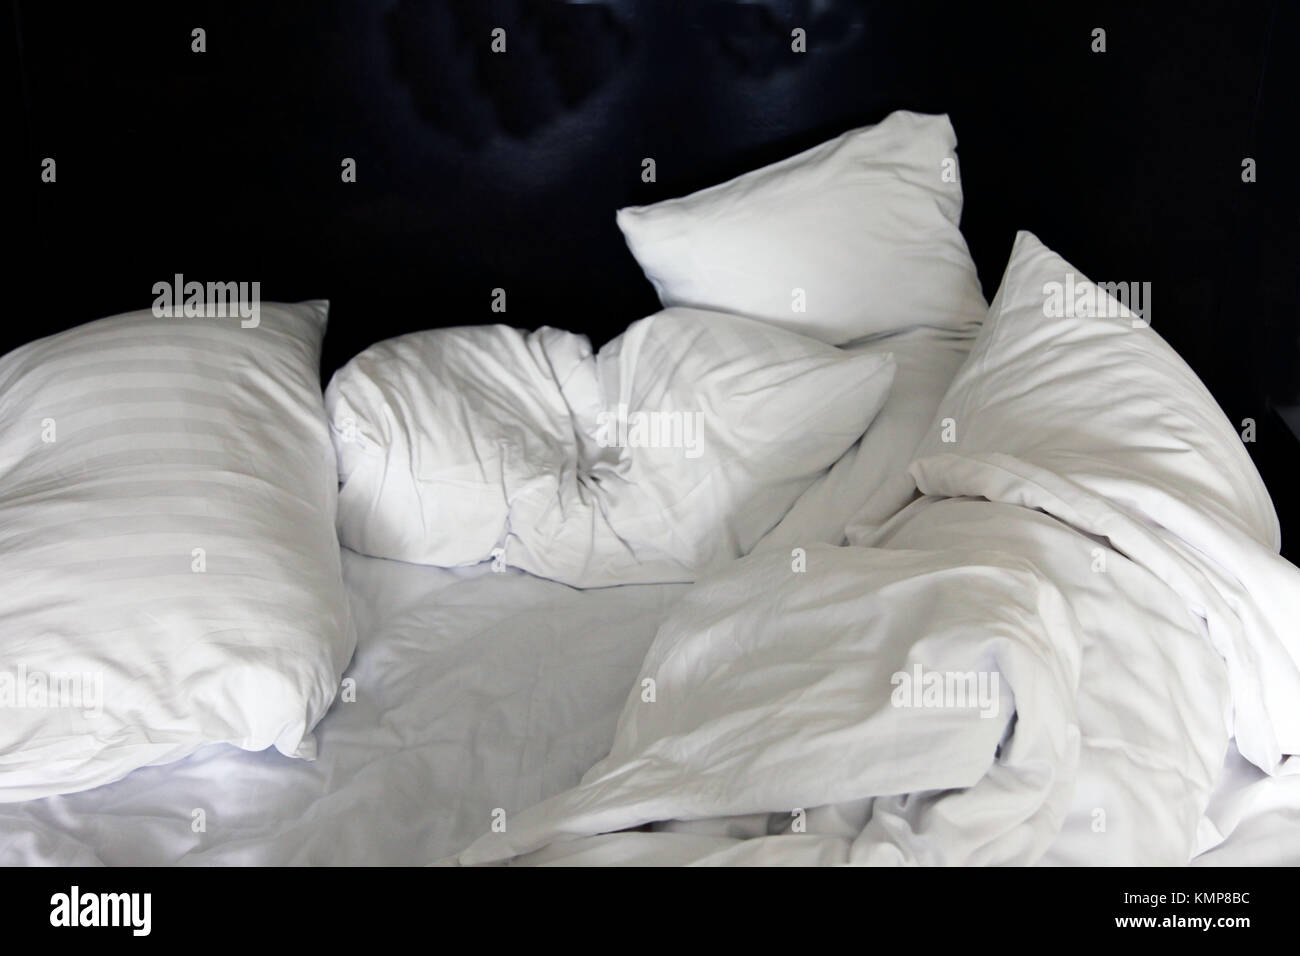 Bed in the morning after the night with many messy pillows and bedsheet Stock Photo